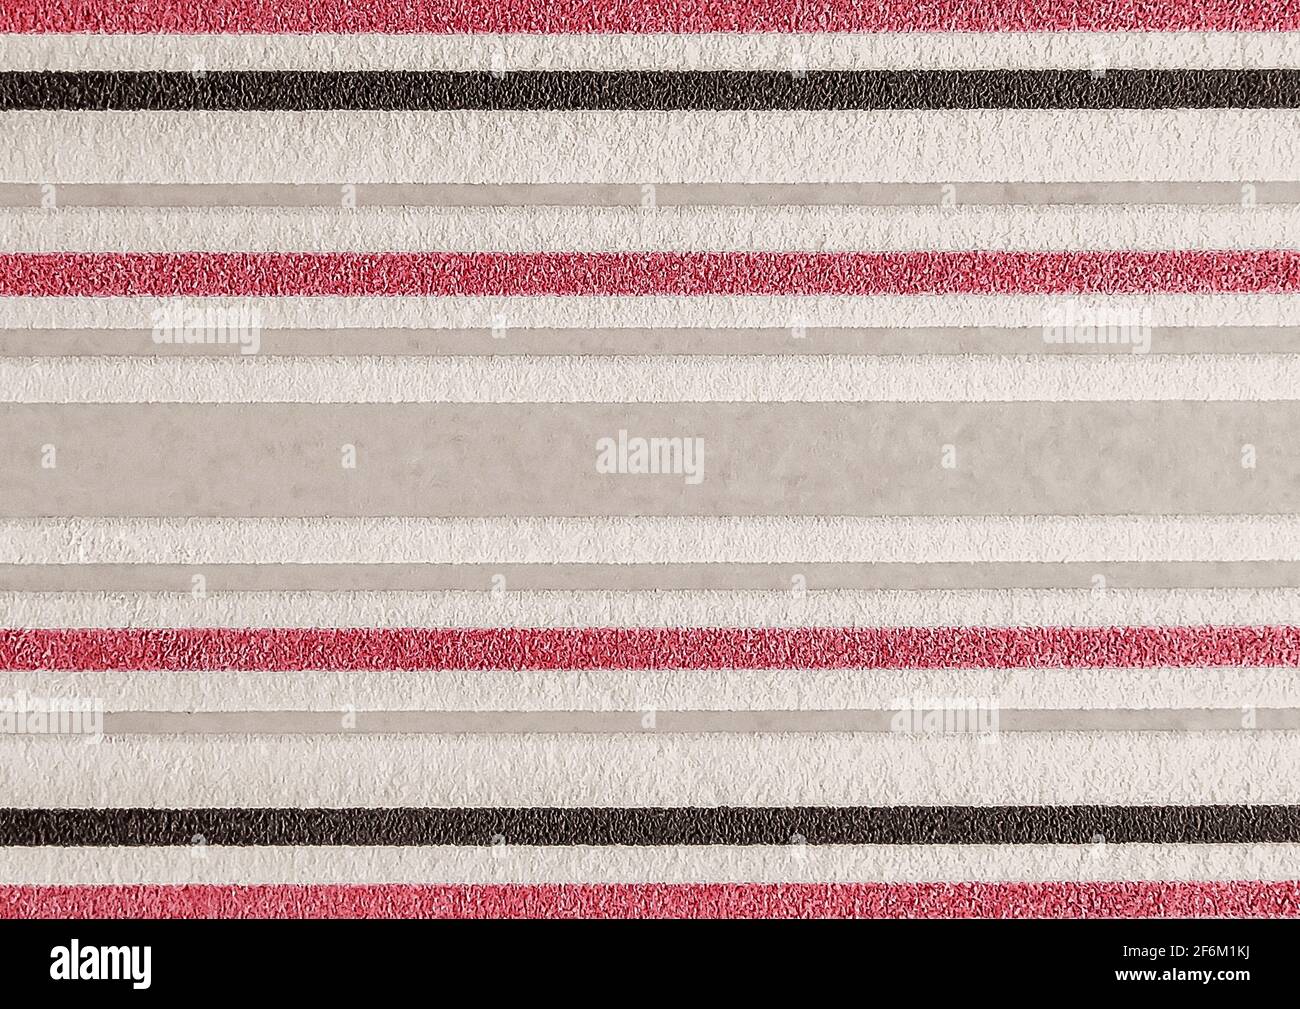 Seamless texture of decorative colored wallpapers with abstract horizontal lines background. Stock Photo